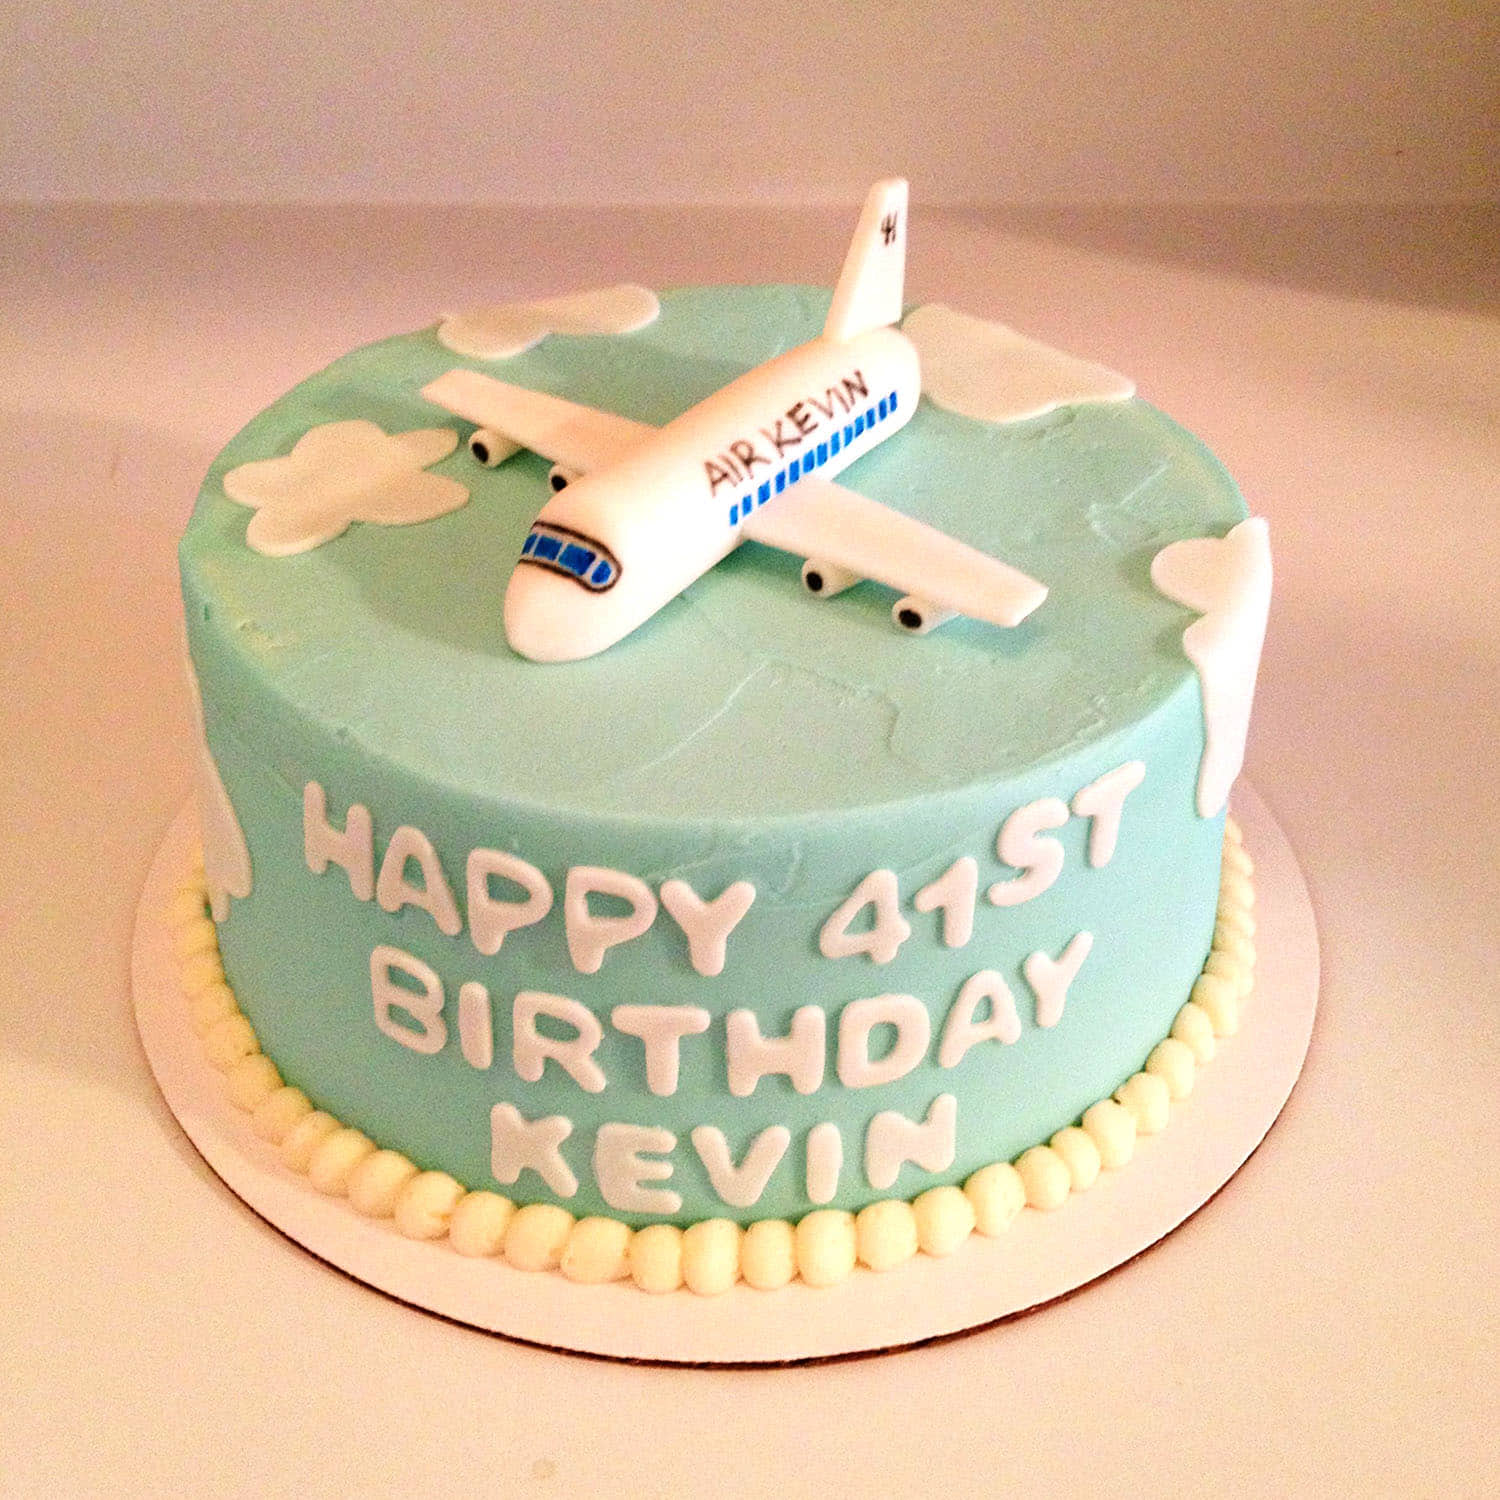 3D Airplane With Clouds Edible Cake Topper Fondant, Gum paste, Icing, | eBay